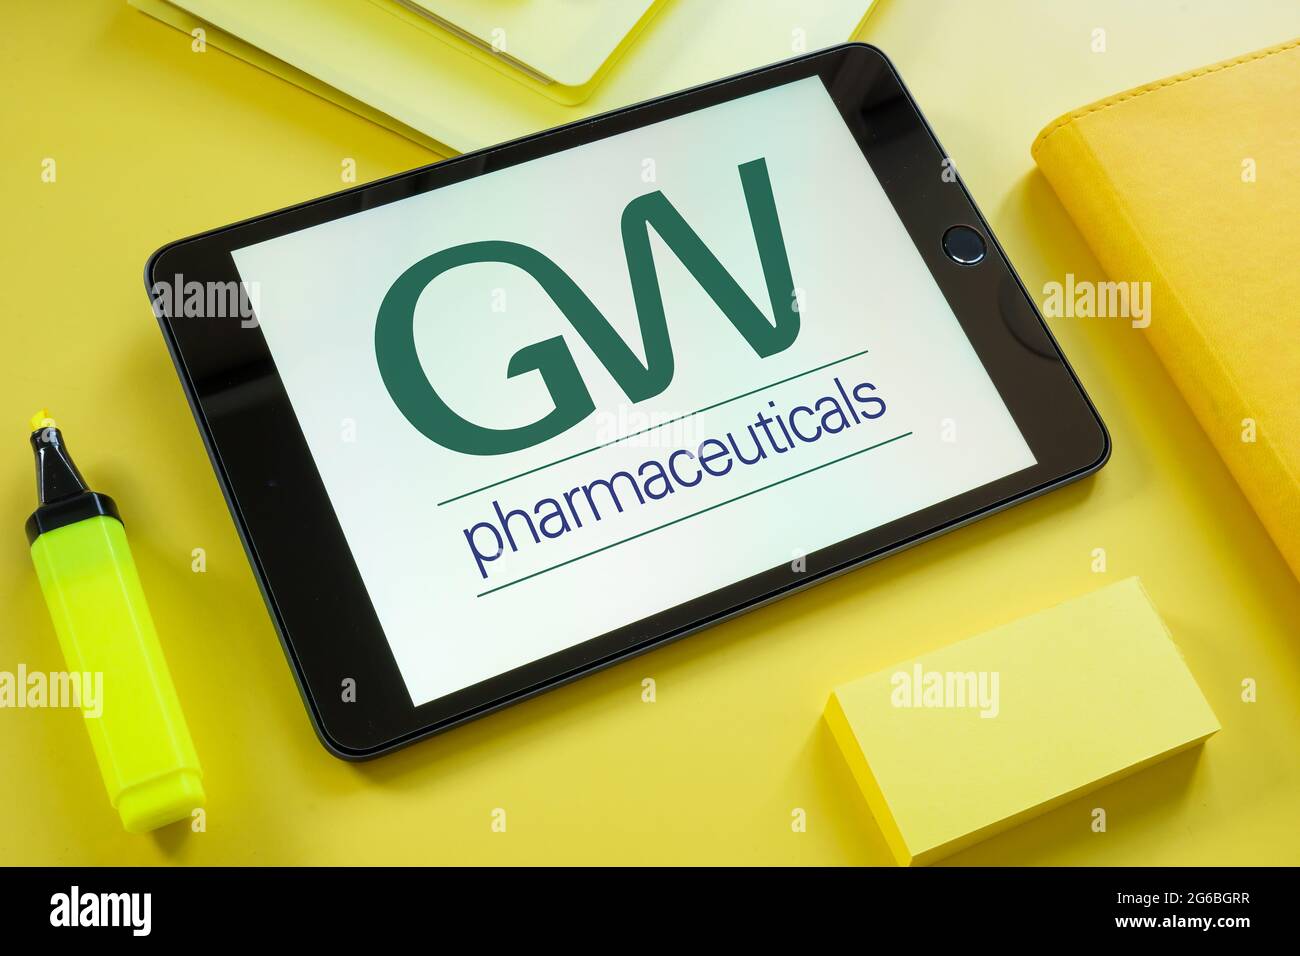 KYIV, UKRAINE - June 30, 2021. Tablet with GW pharmaceuticals logo on the screen. Stock Photo